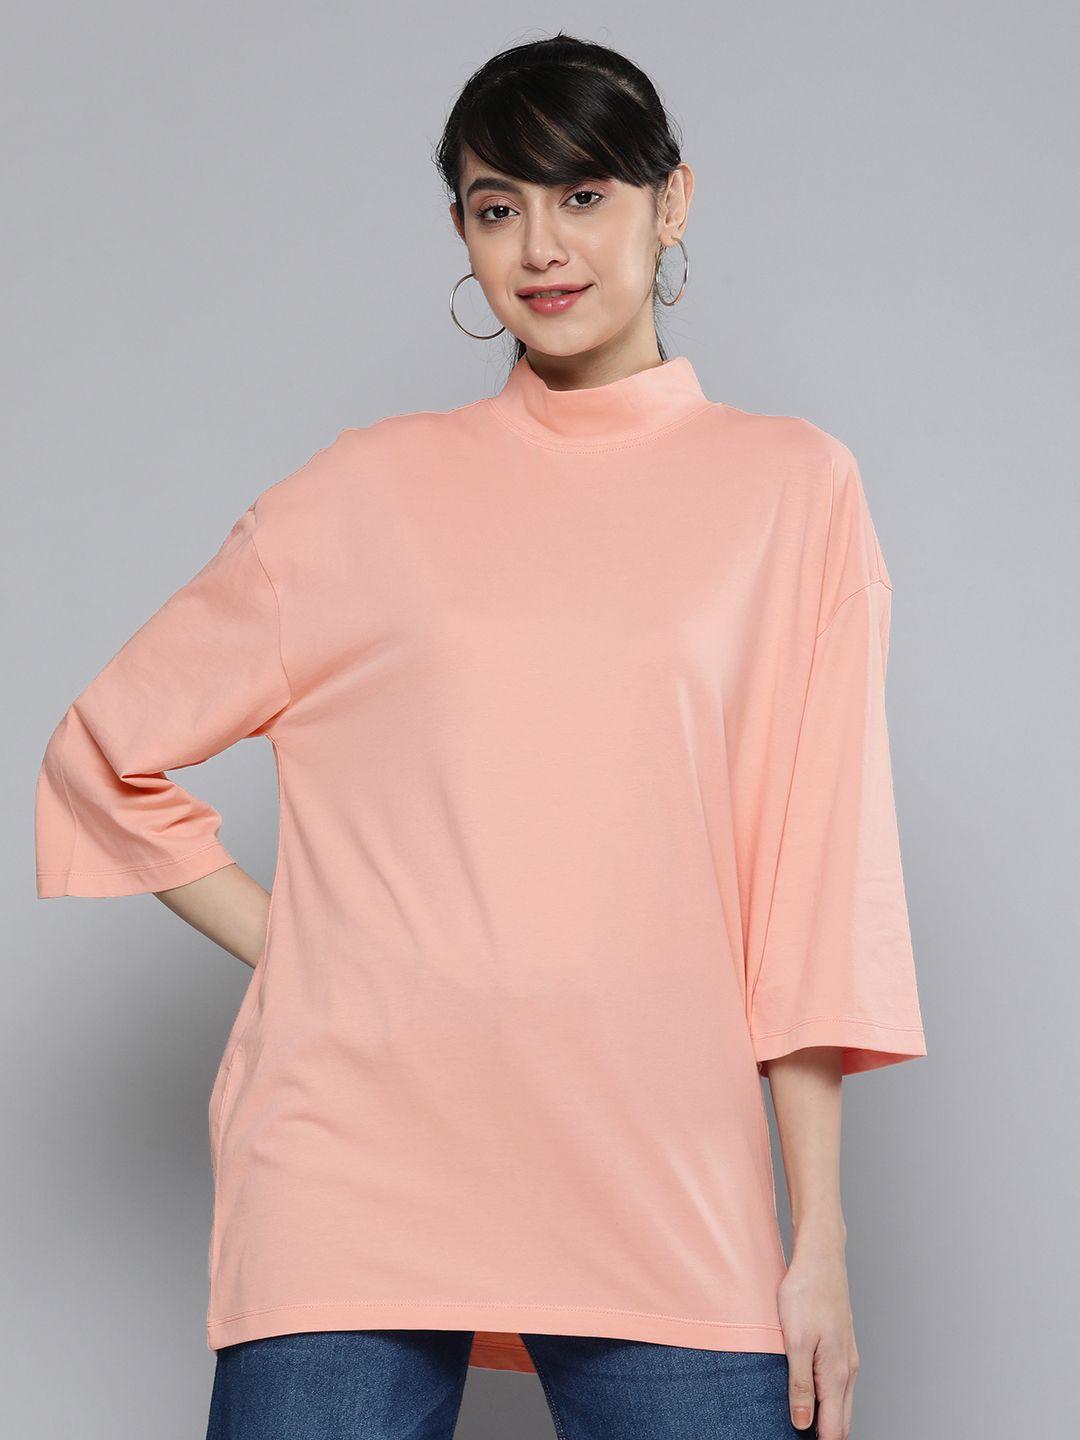 here&now-women-peach-coloured-high-neck-drop-shoulder-sleeves-pure-cotton-t-shirt